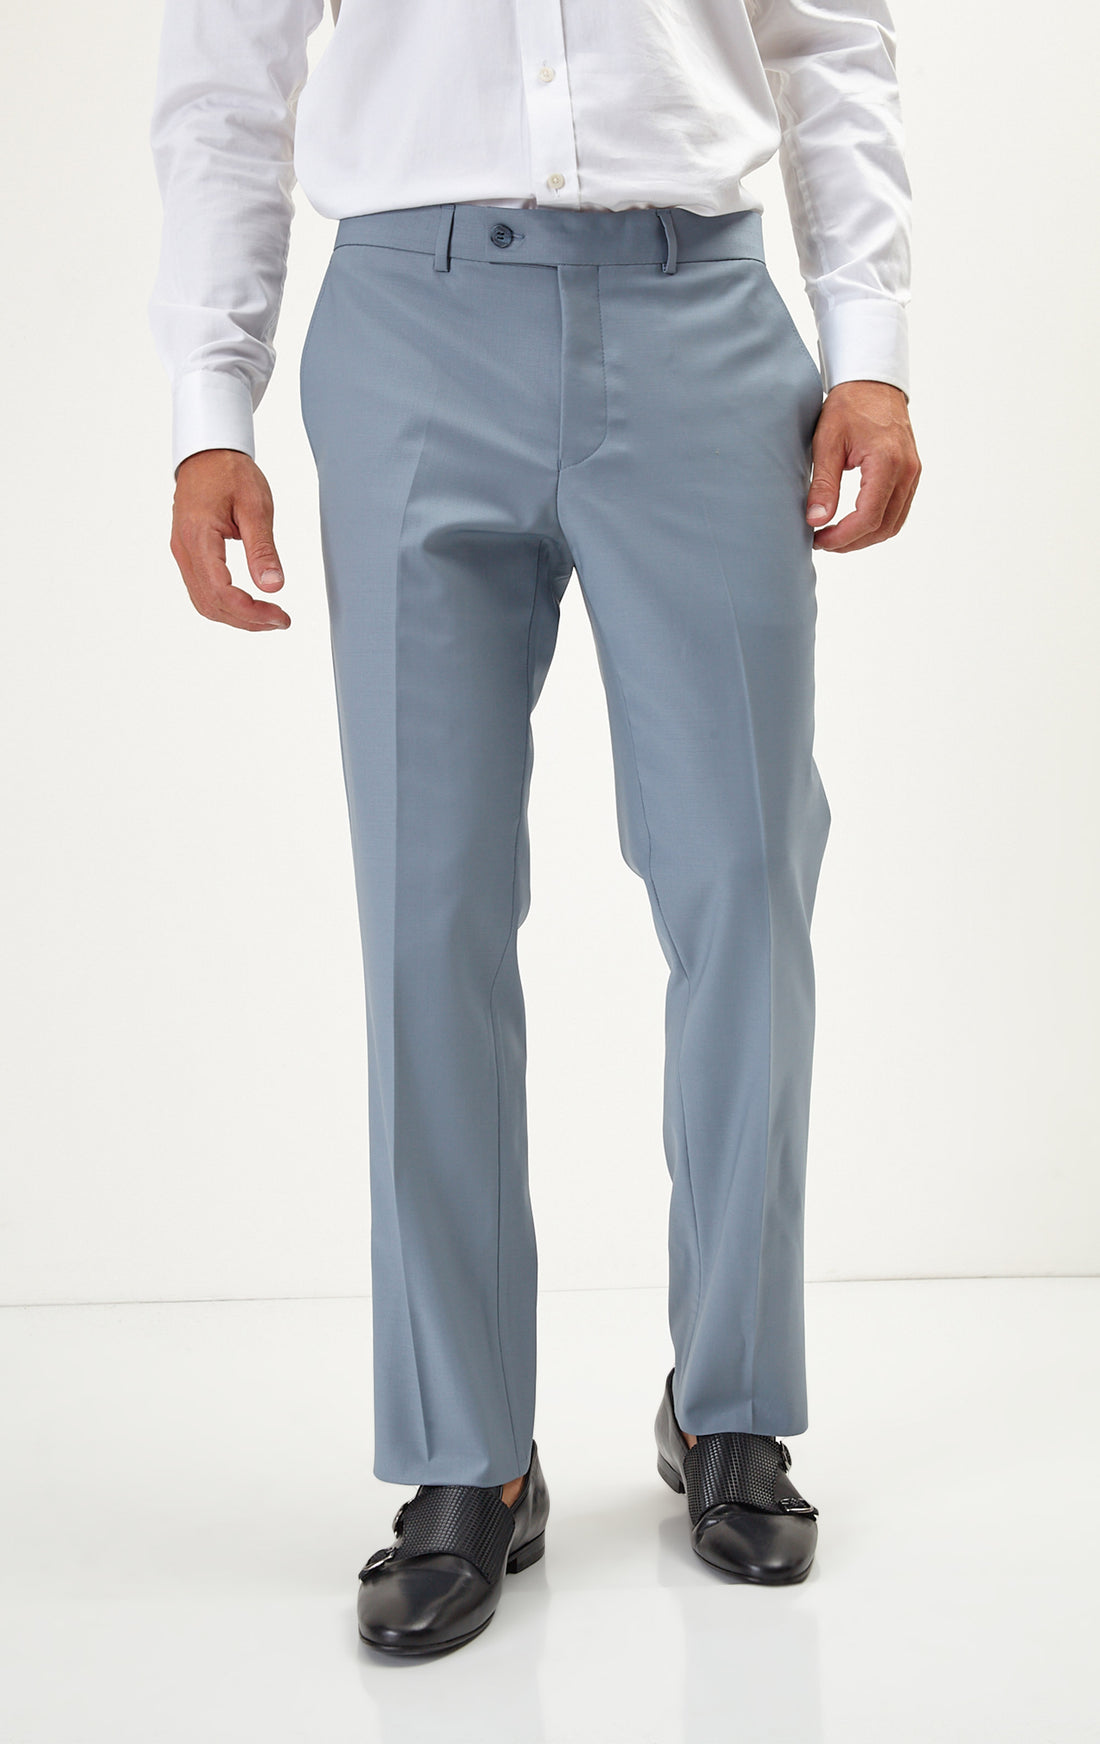 N° R206 Double Breasted Merino Wool Suit - Cool Grey - Ron Tomson